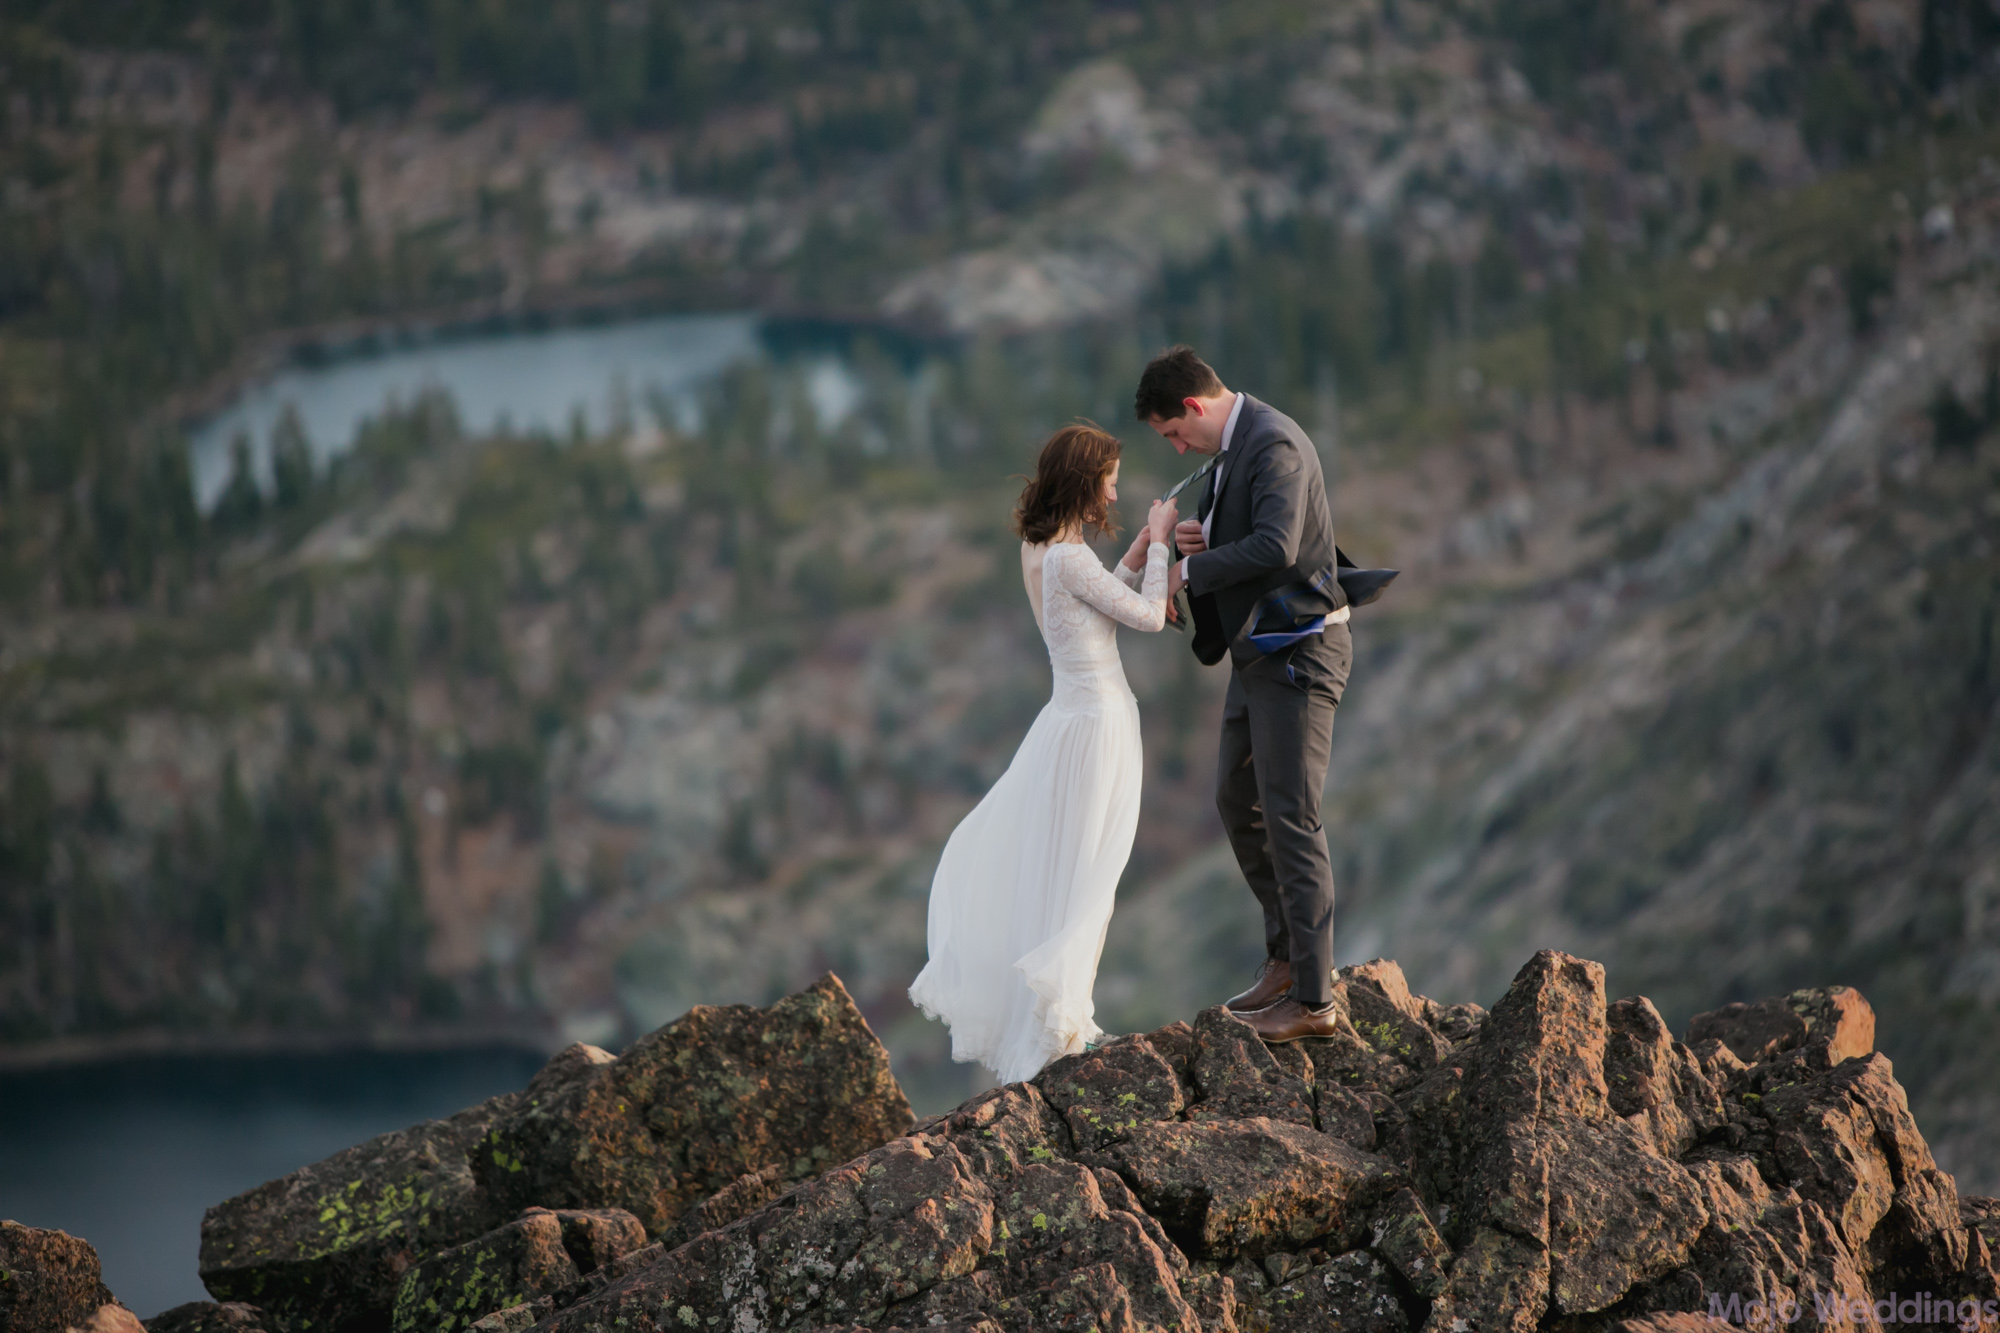 She fixes his tie as they carefully stand on the mountaintop.